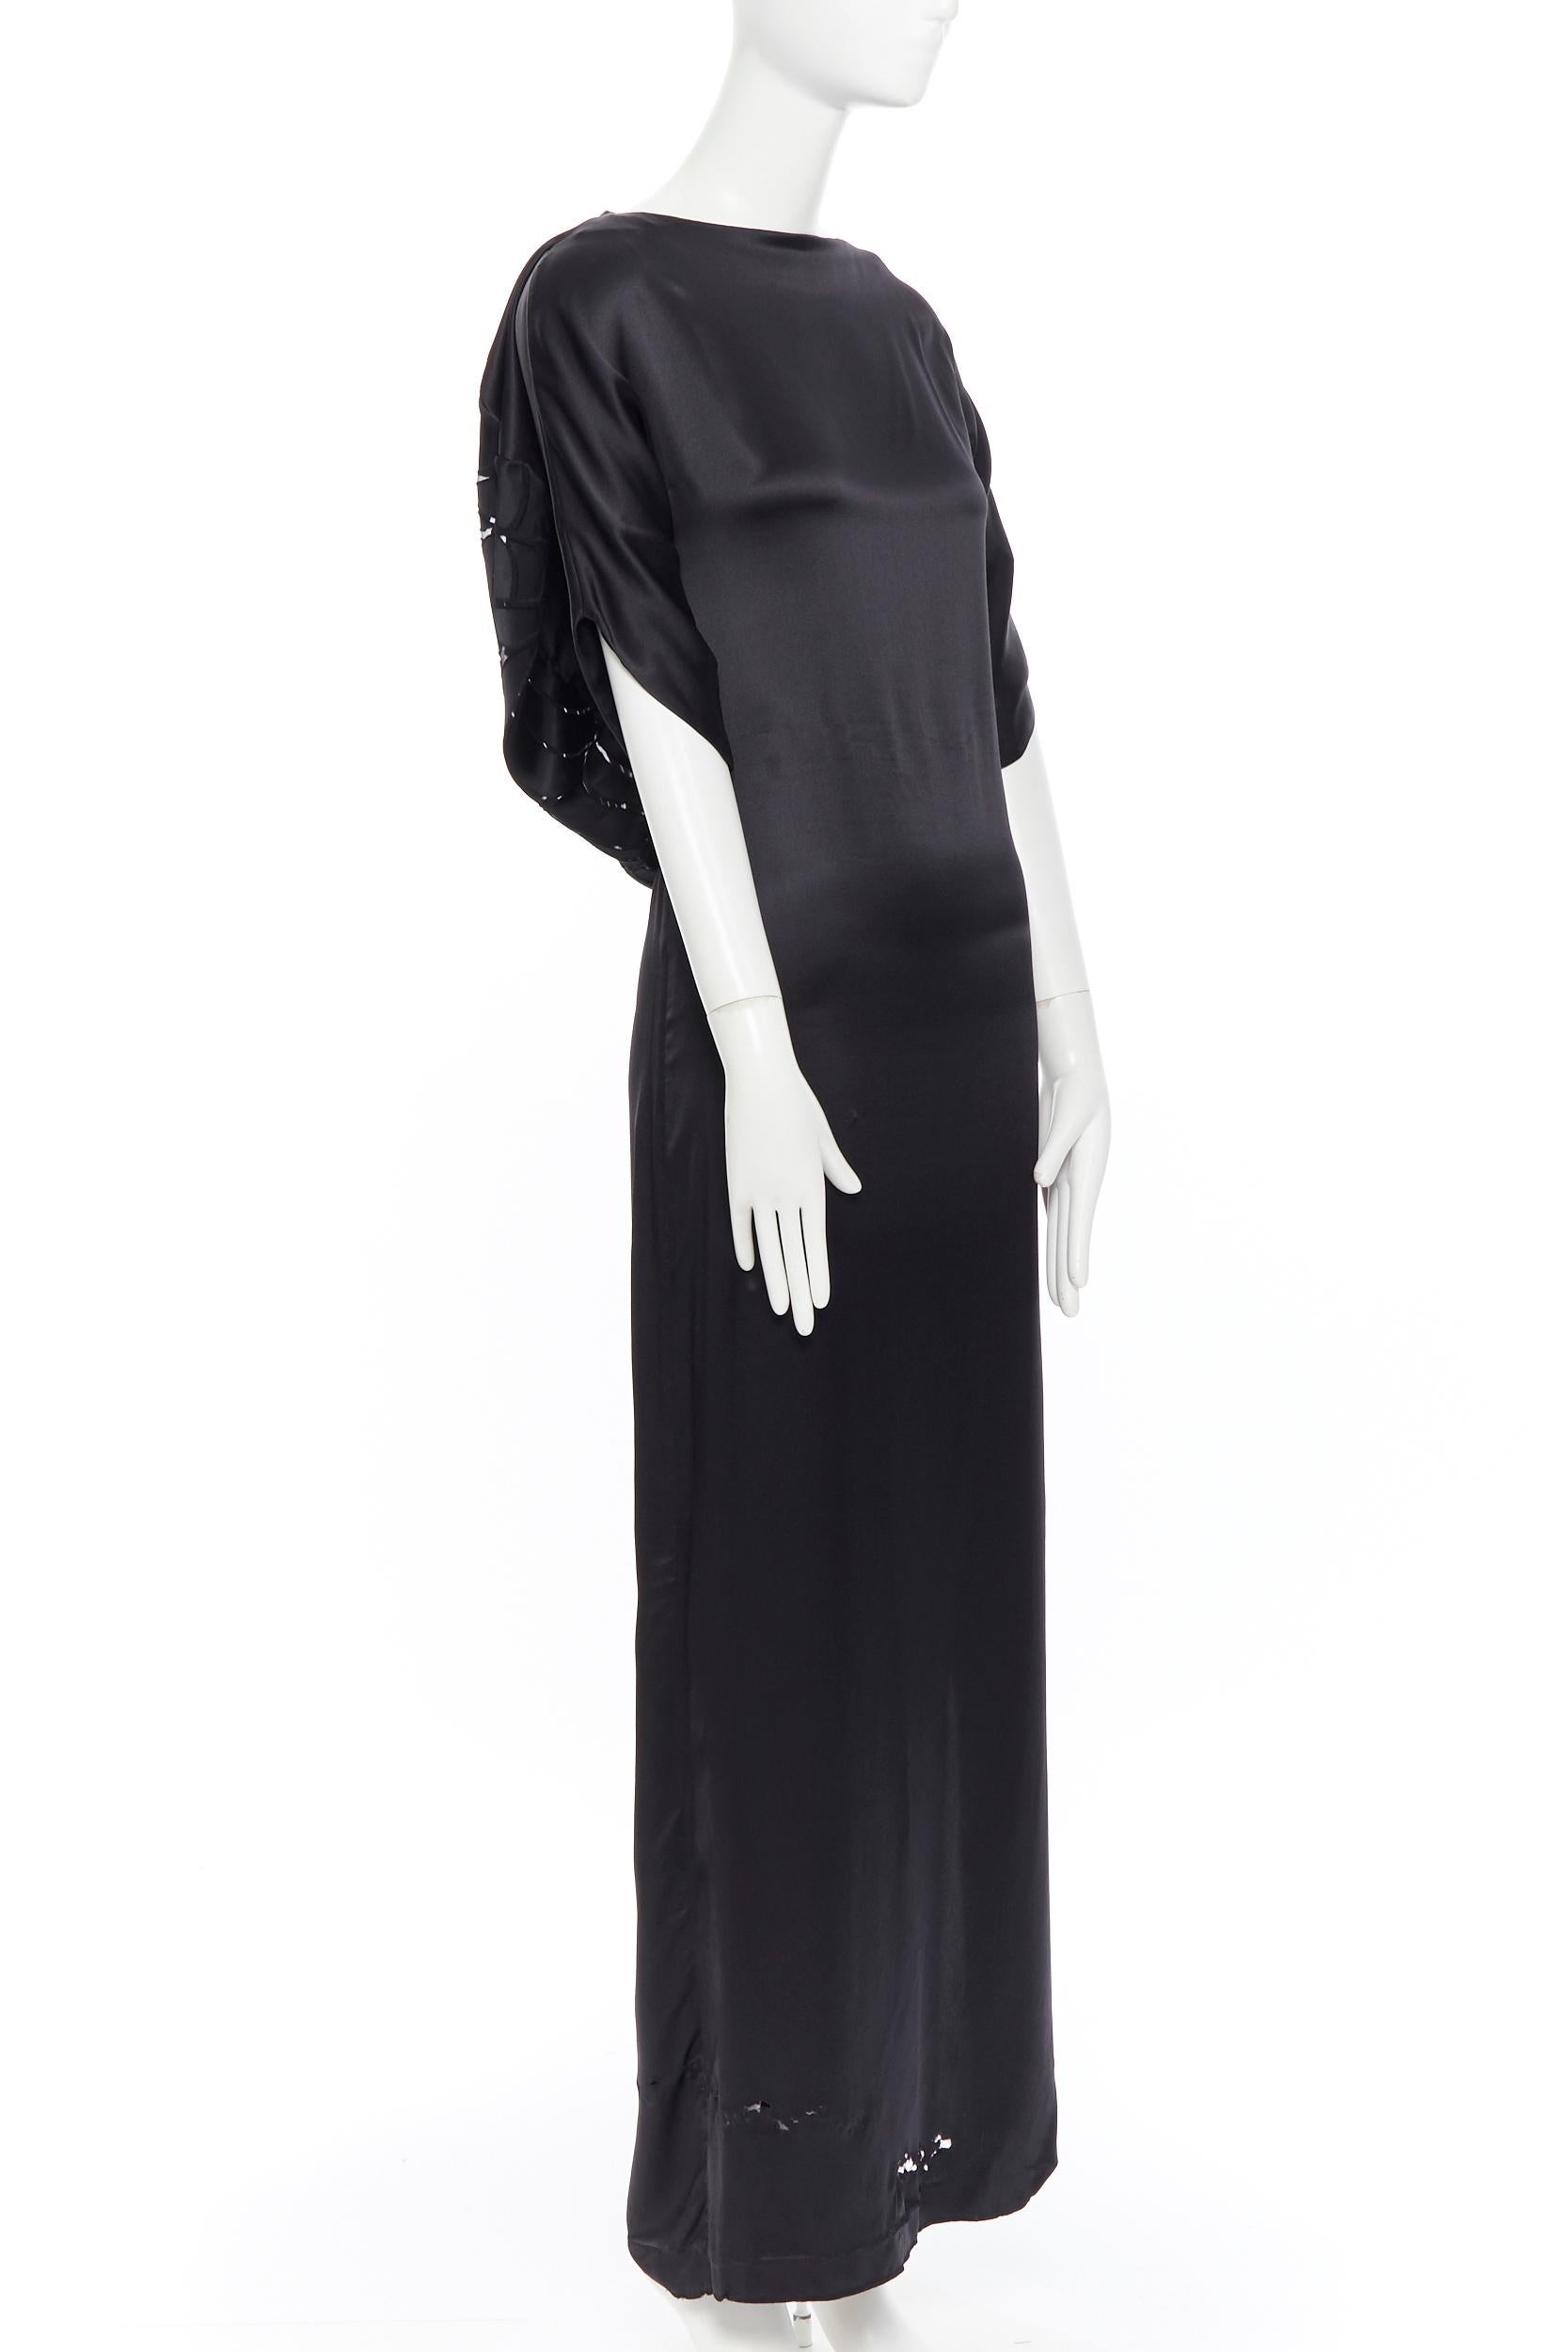 MAISON MARTIN MARGIELA black silk cocoon bias cut dress gown cape slit maxi IT36 
Reference: JETI/A00170 
Brand: Maison Margiela 
Designer: Martin Margiela 
Material: Silk 
Color: Black 
Pattern: Solid 
Extra Detail: Bias cut dress. Rounded cocoon